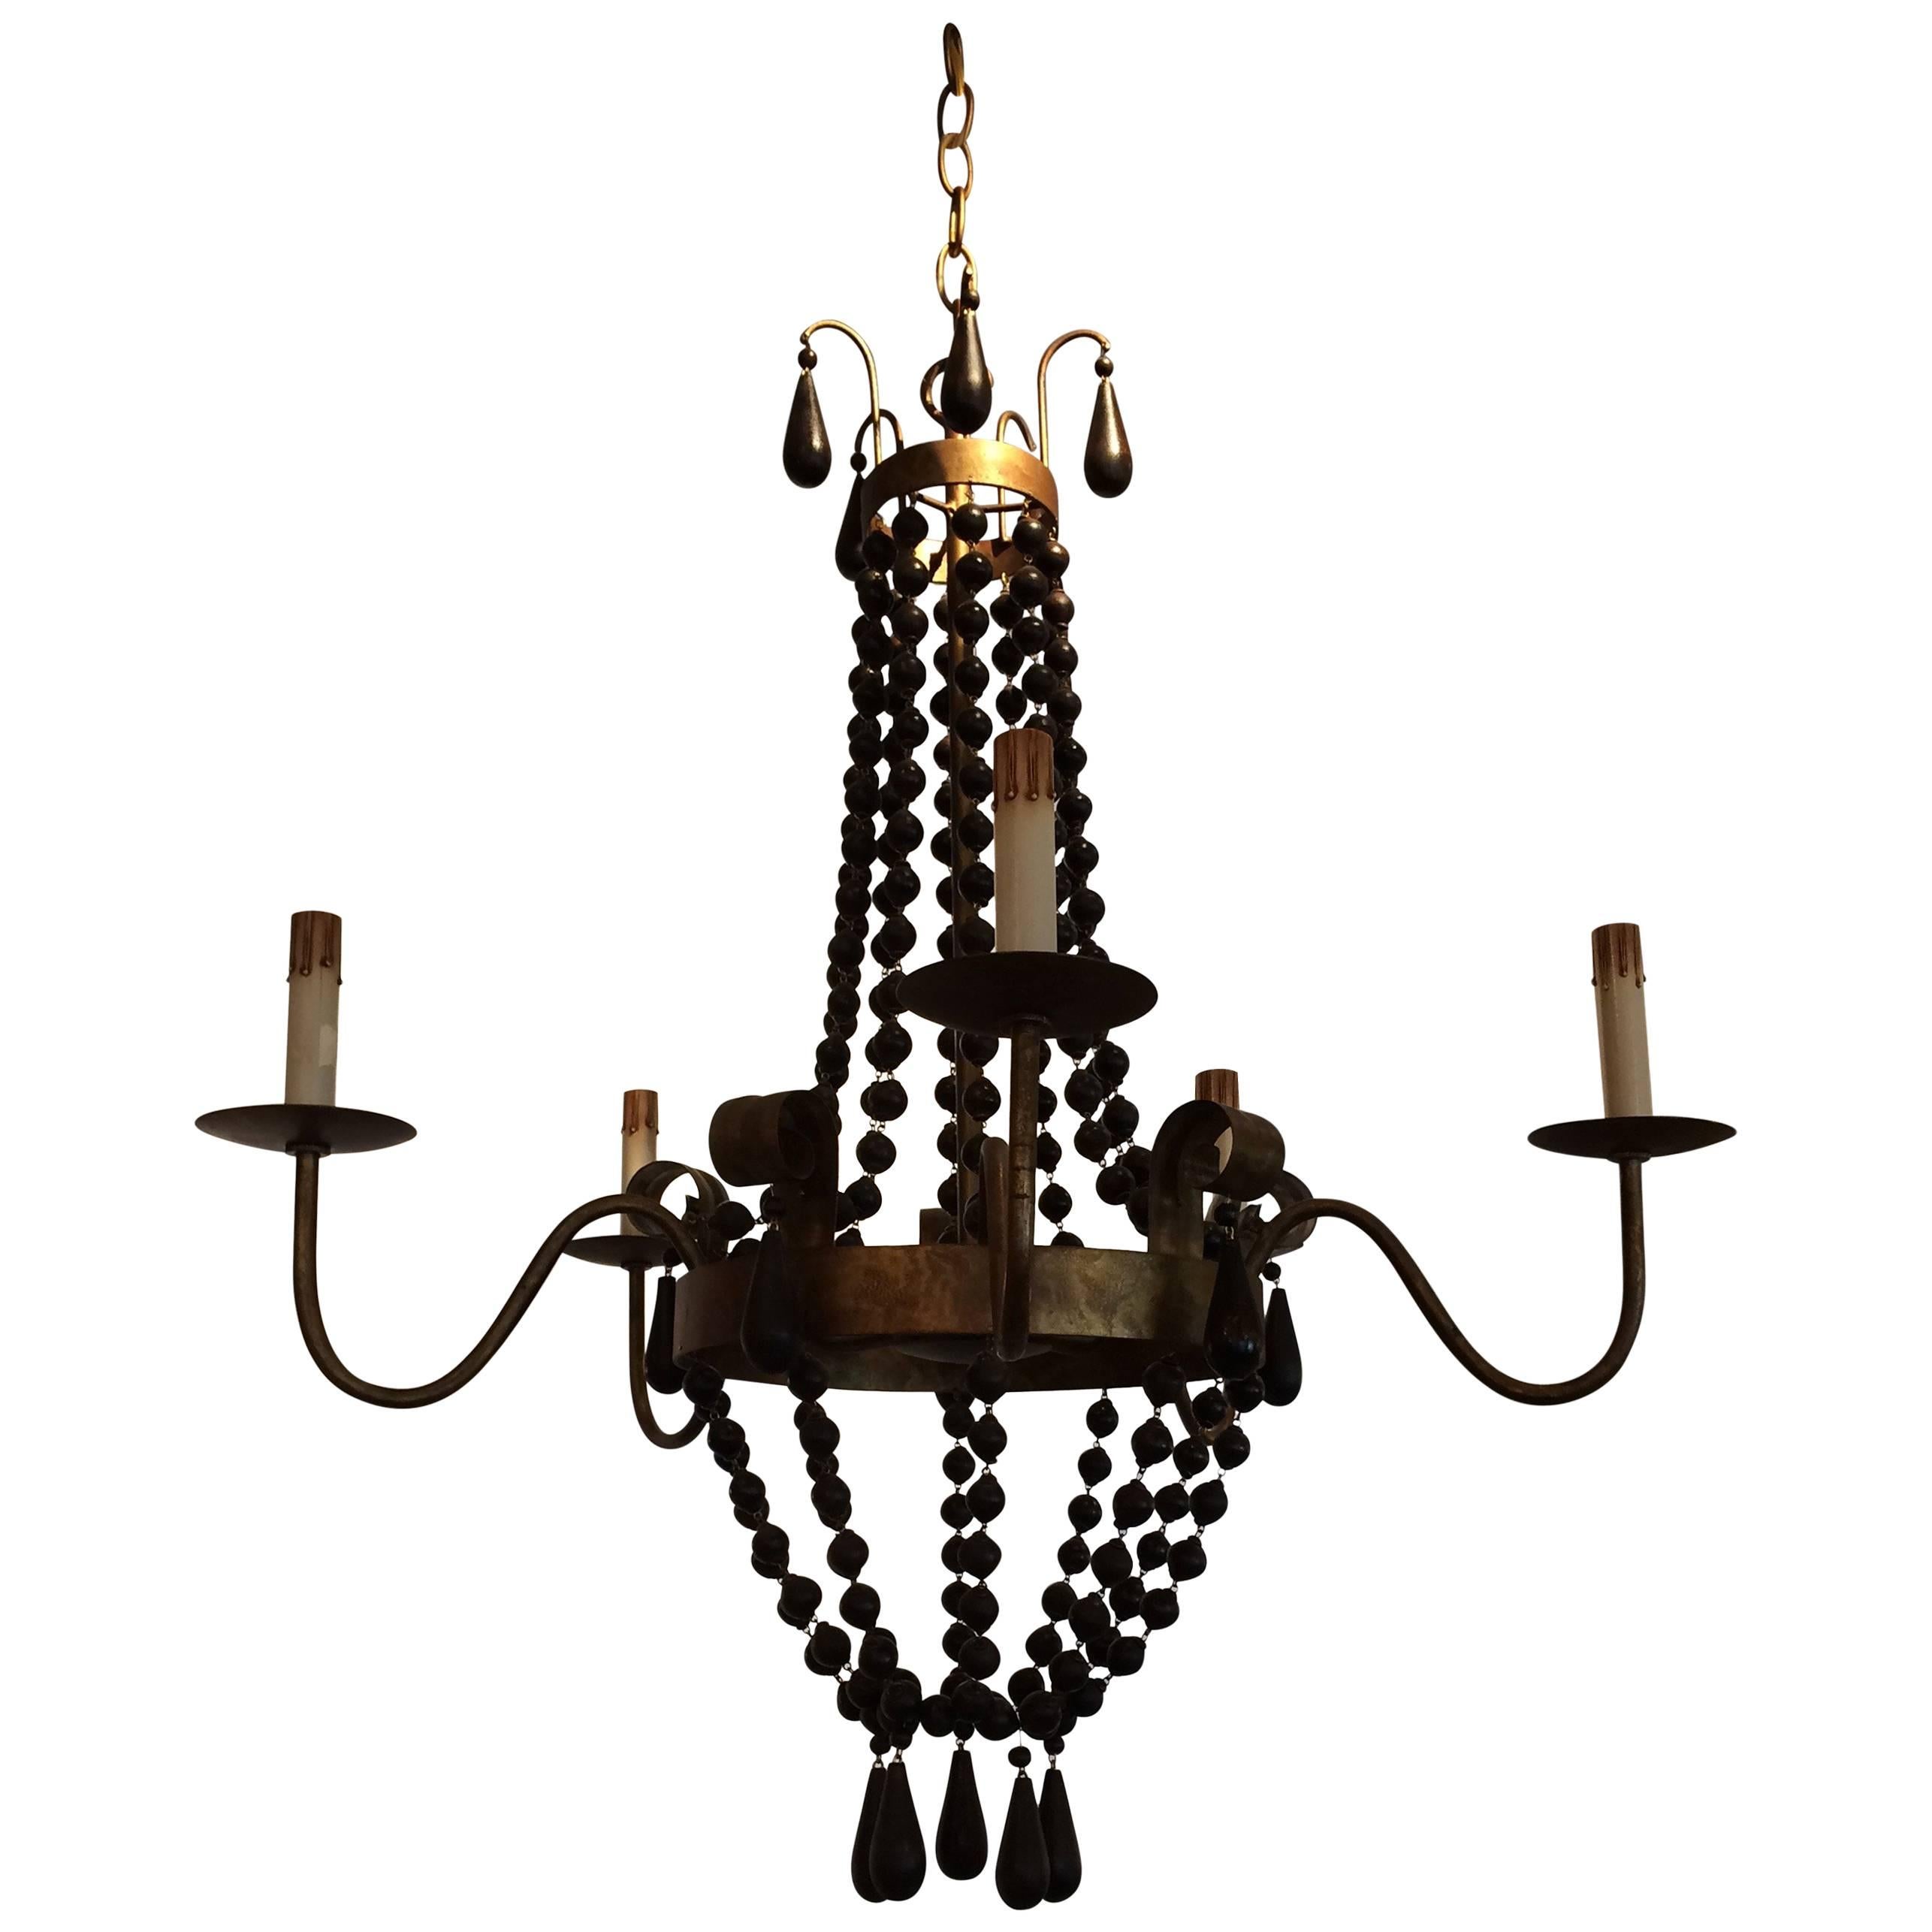 Stylish Iron and Wooden Bead Chandelier